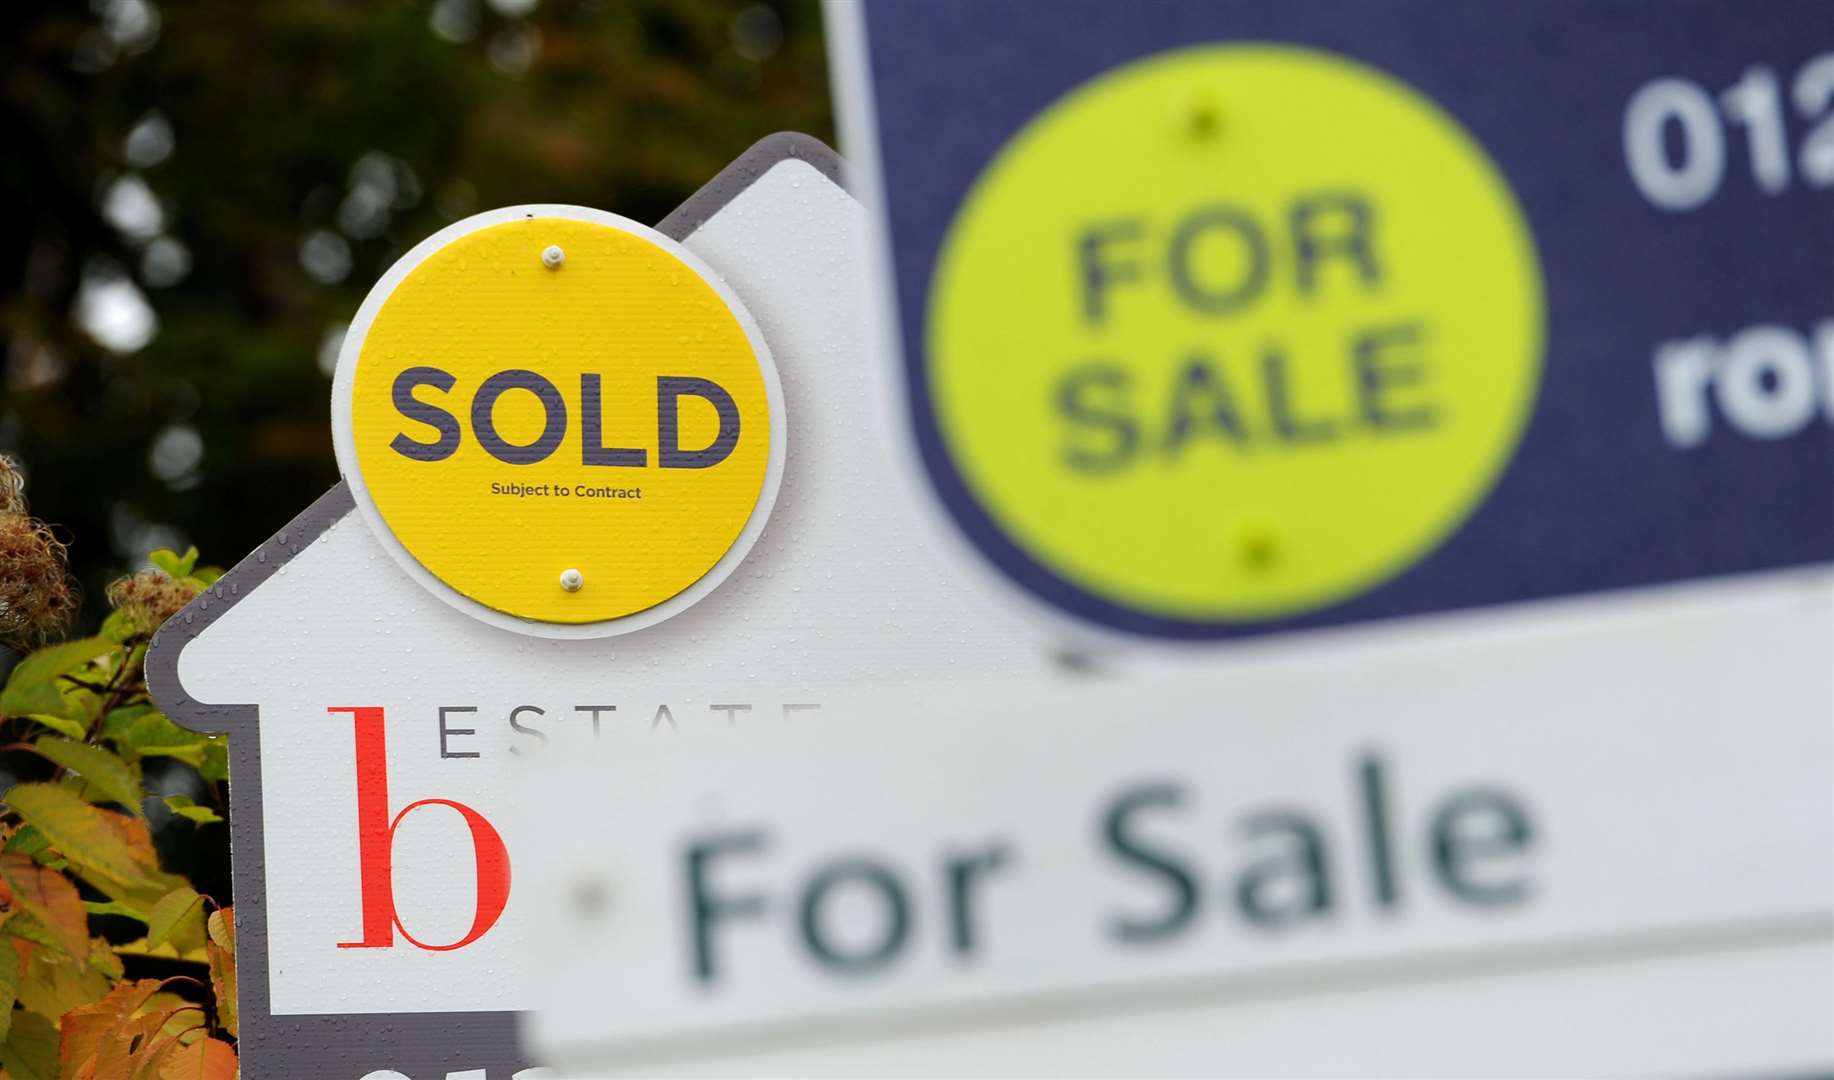 Mortgage costs have rocketed this year as interest rates were hiked up